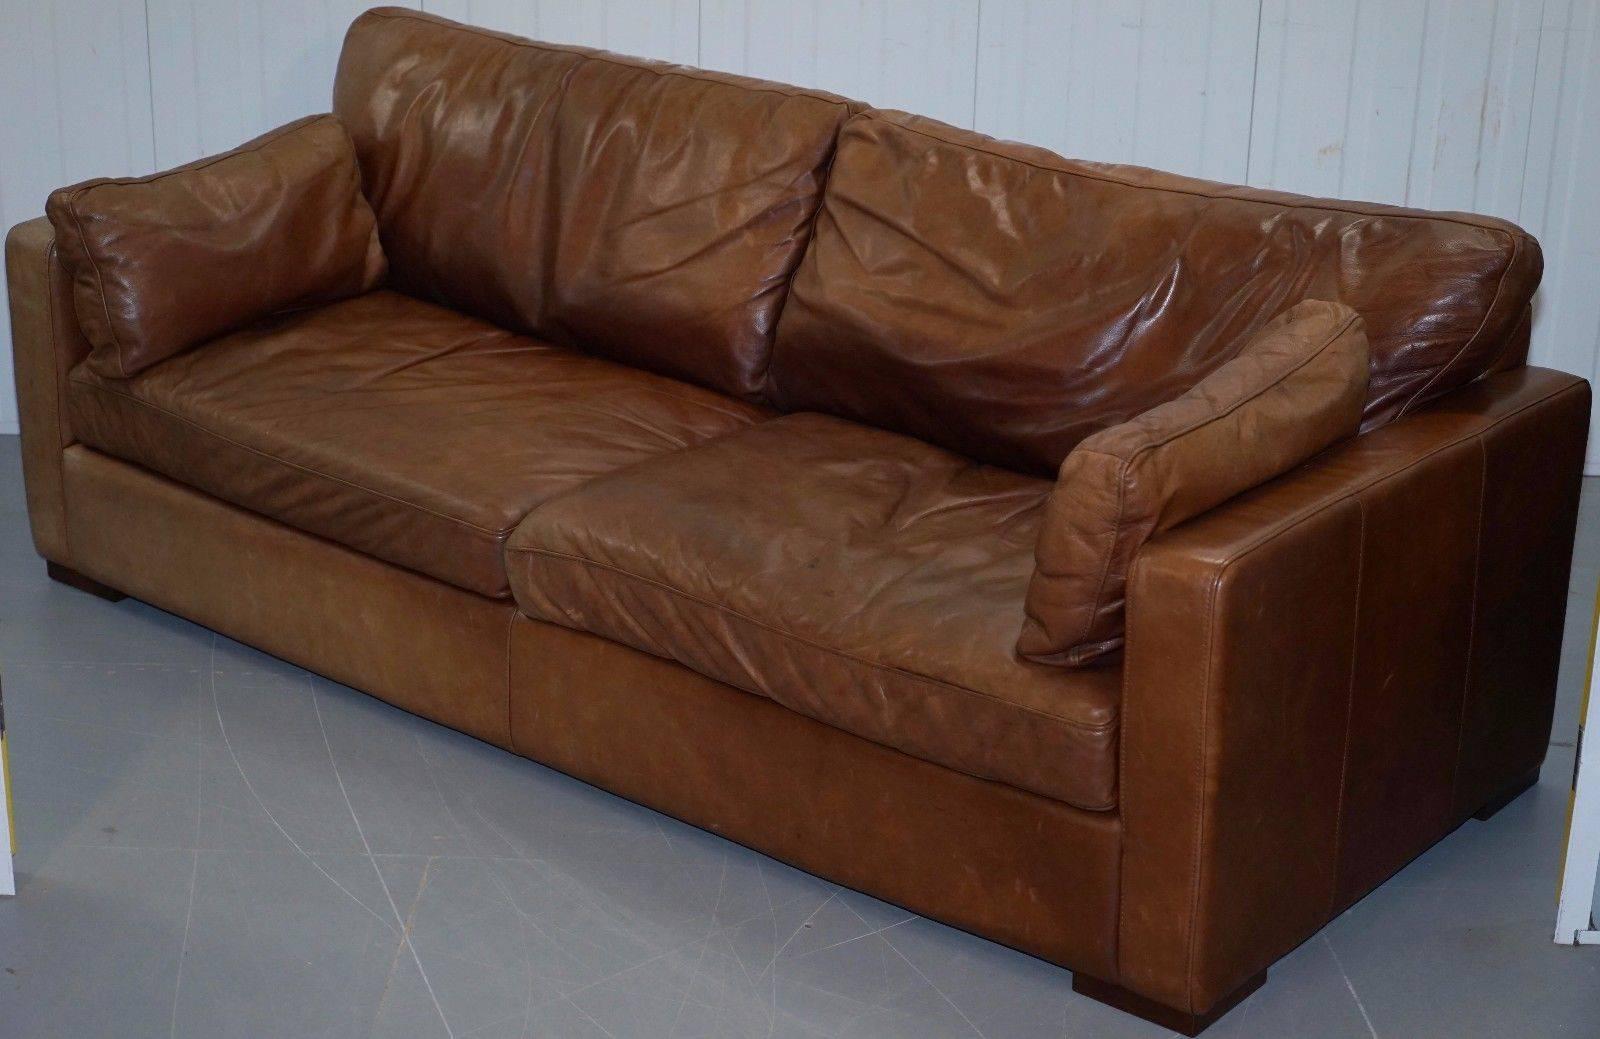 Wimbledon-Furniture is delighted to offer for sale this House Of Fraser aged brown distressed leather four-seat sofa

A very good looking and well-made piece, upholstered with thick full aniline leather which is upholstered plain and then hand